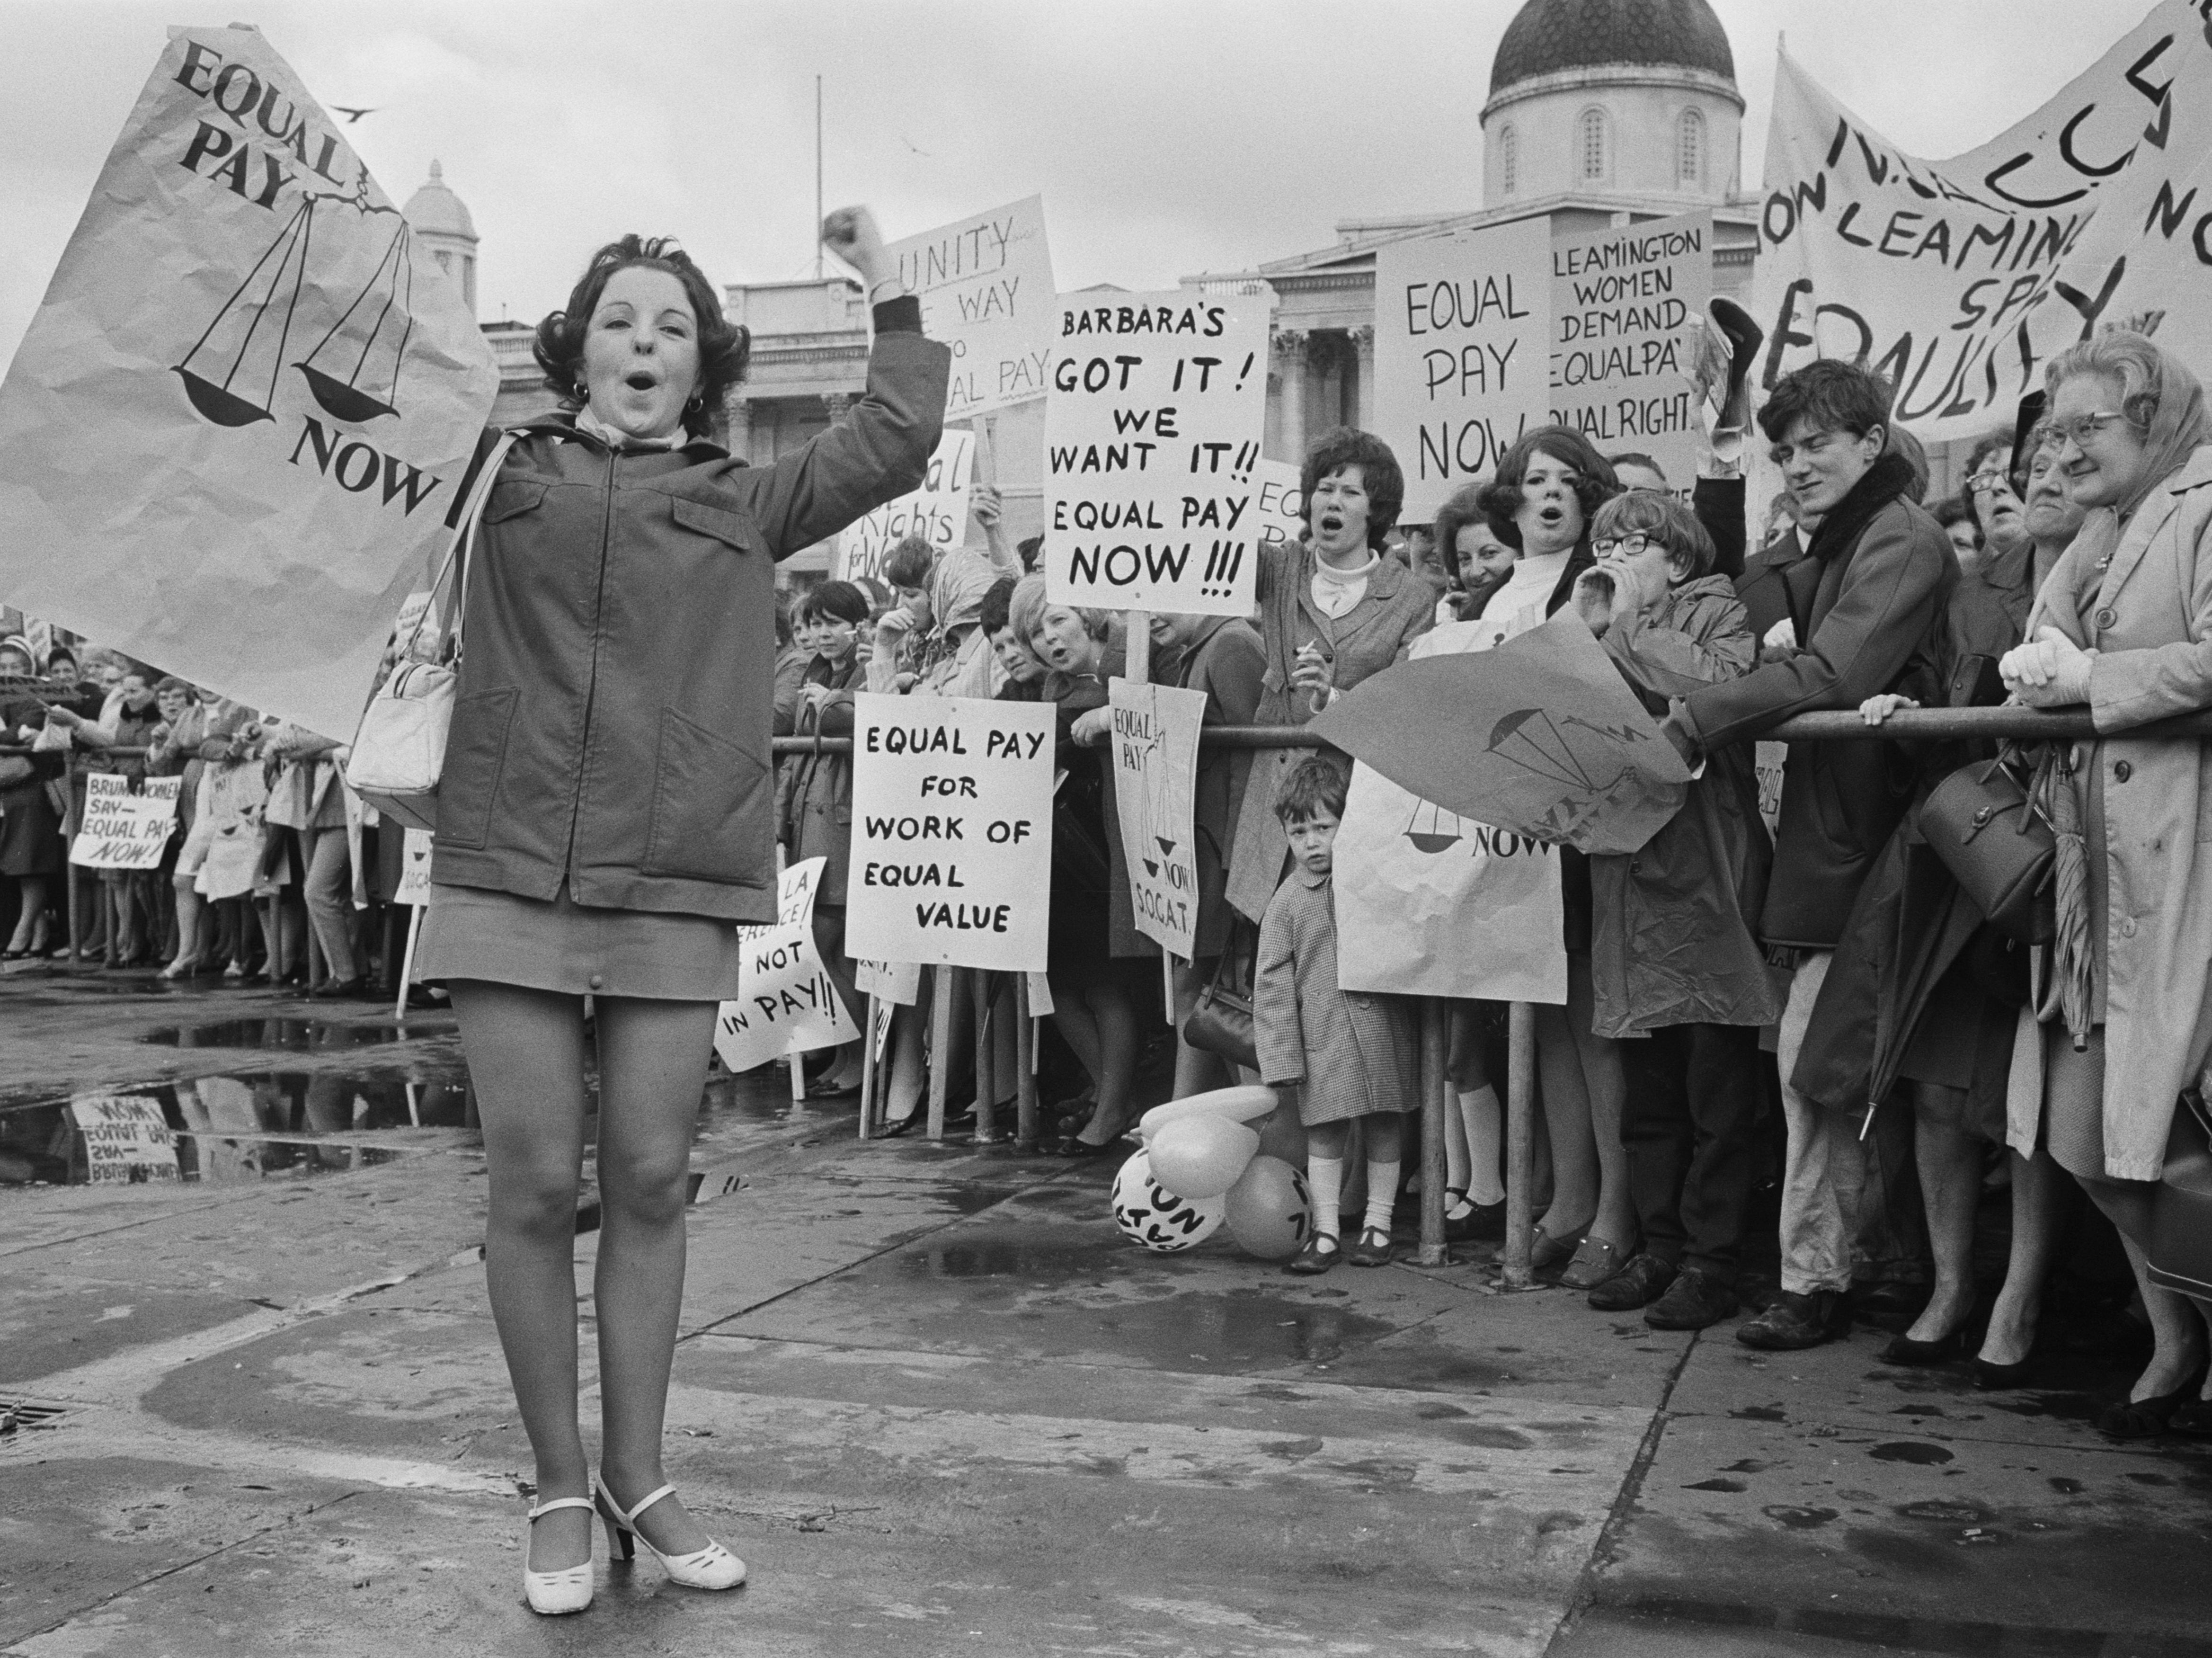 Money matters: women demand equal pay at a rally in London in 1969